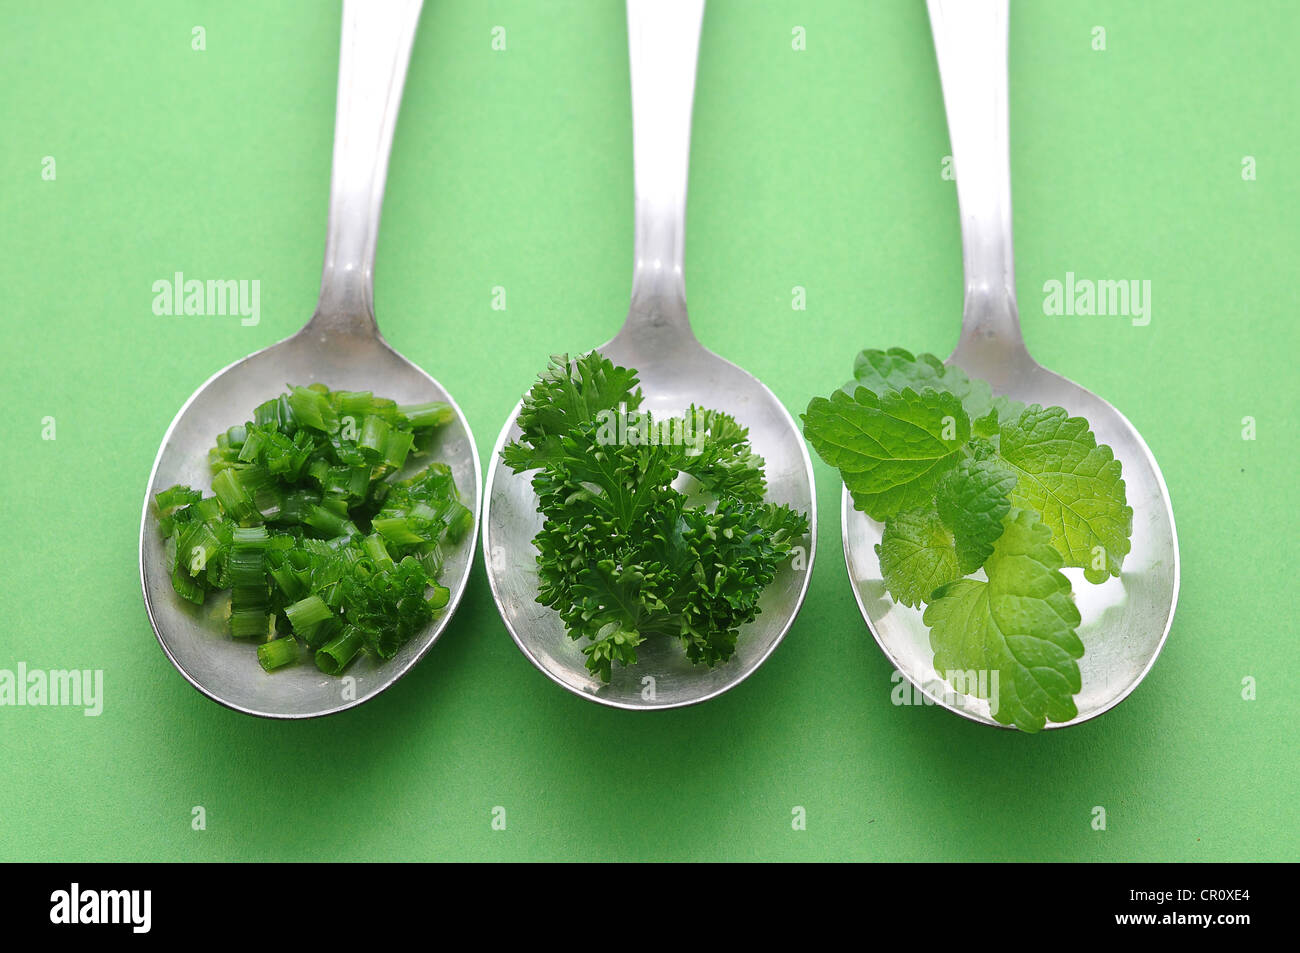 Fresh herbs, parsley, chives, mint, on old spoons Stock Photo